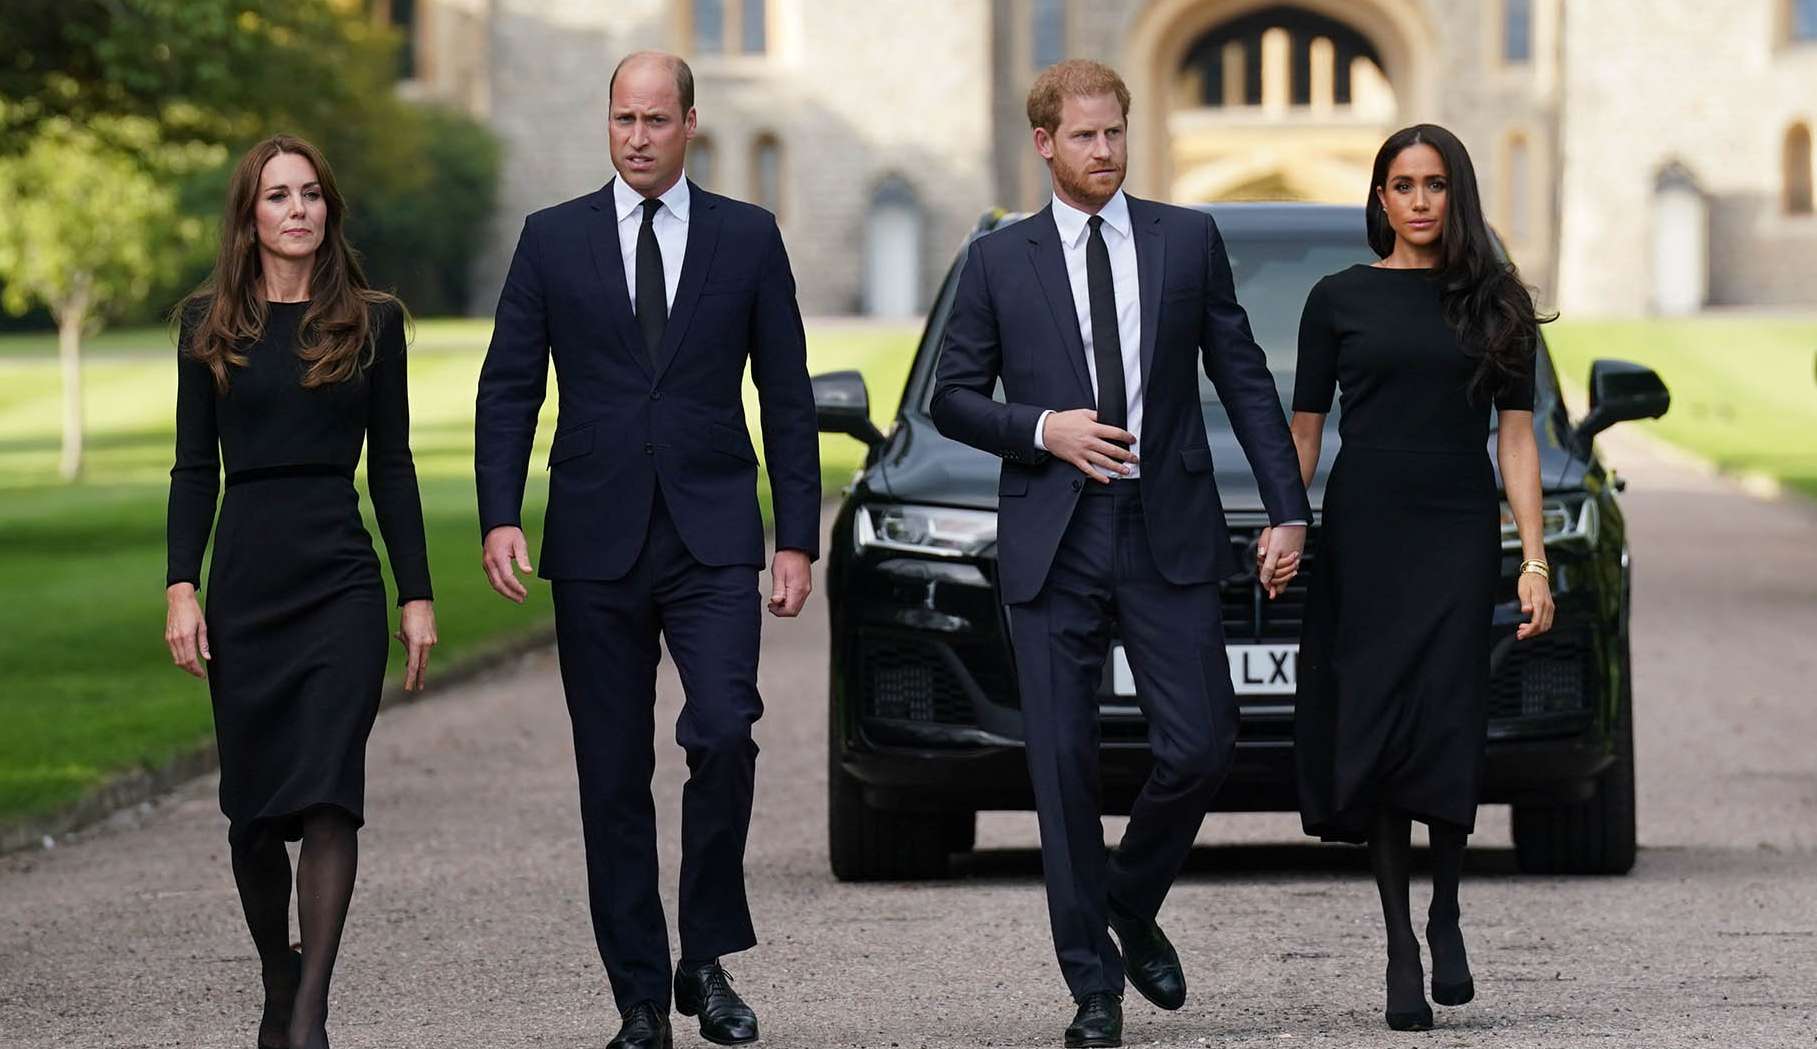 William and Harry with Kate and Meghan in "peace reunion"